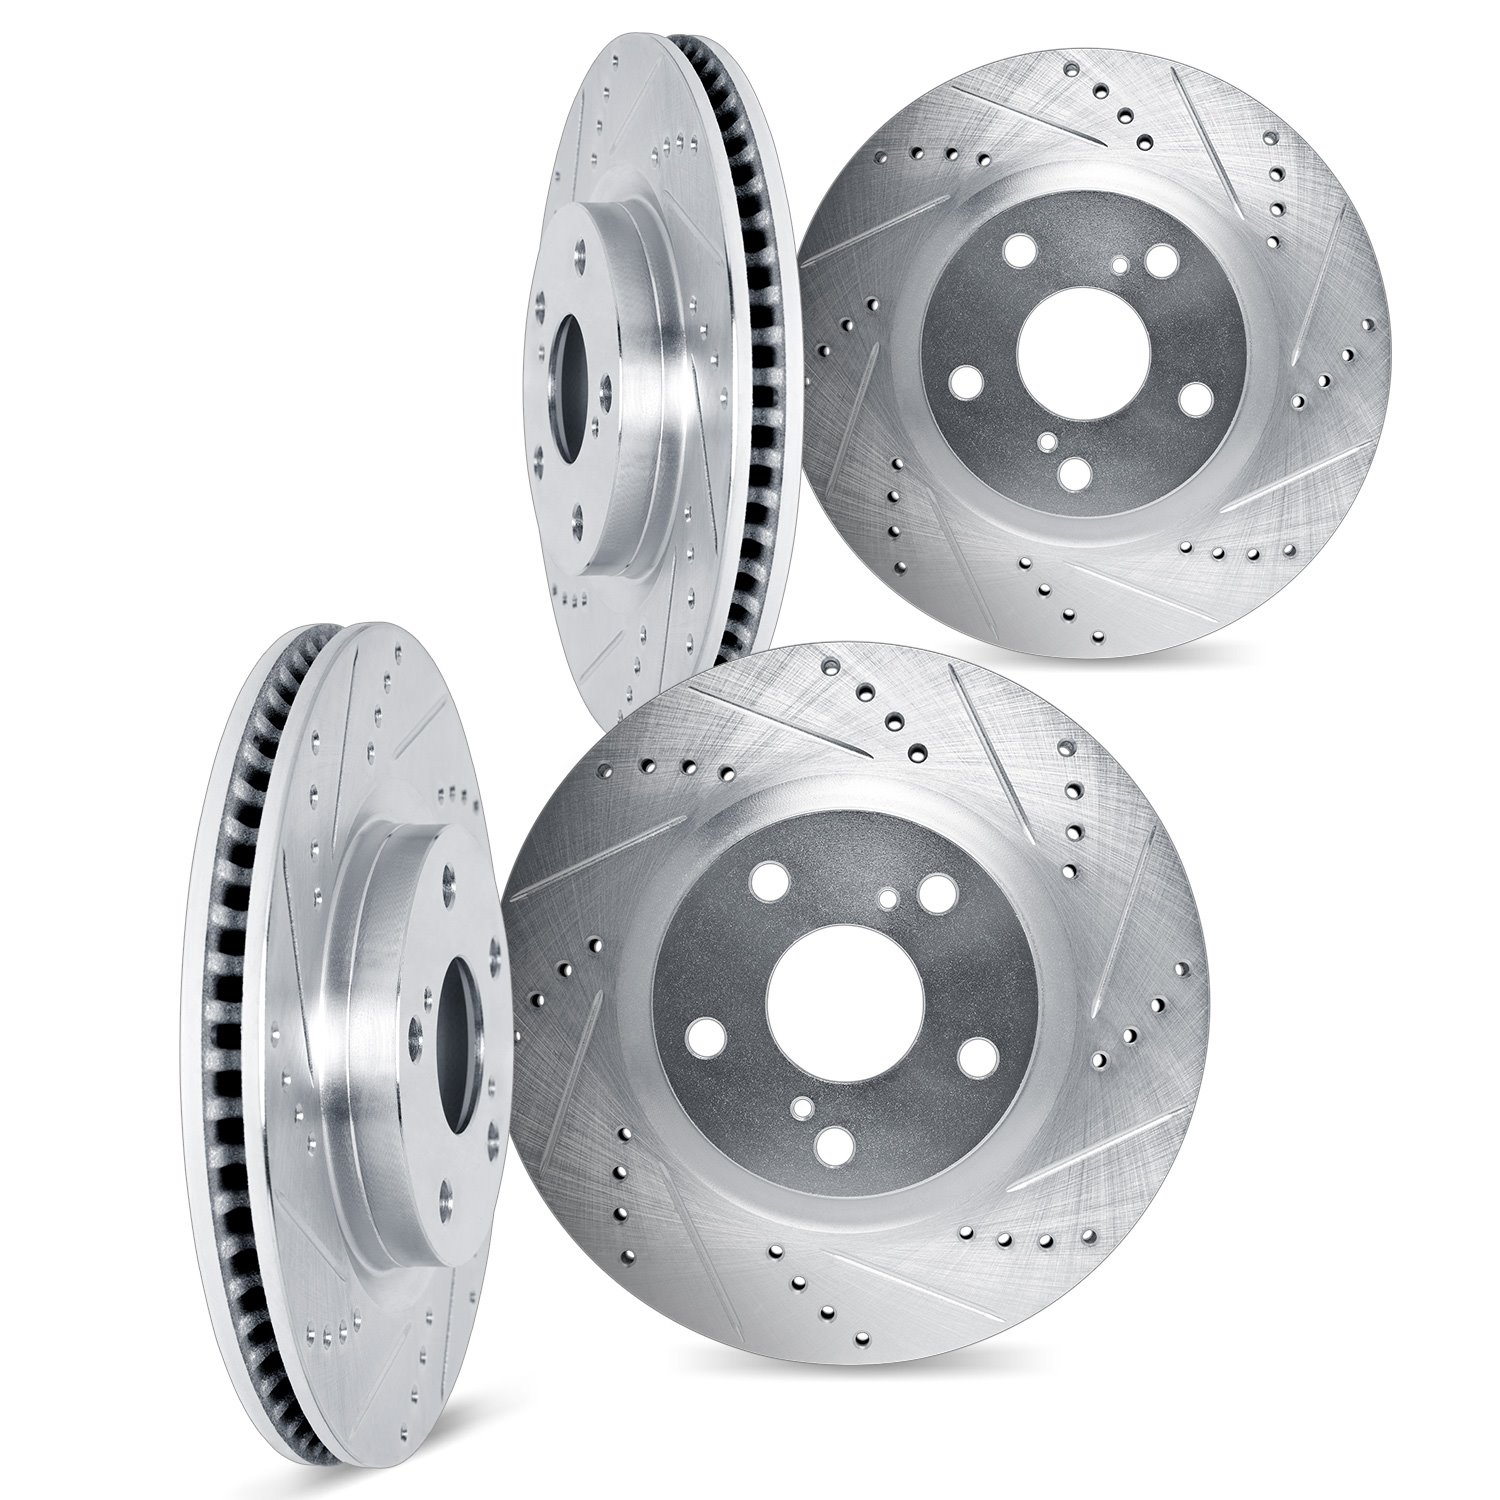 7004-67002 Drilled/Slotted Brake Rotors [Silver], 2003-2019 Infiniti/Nissan, Position: Front and Rear